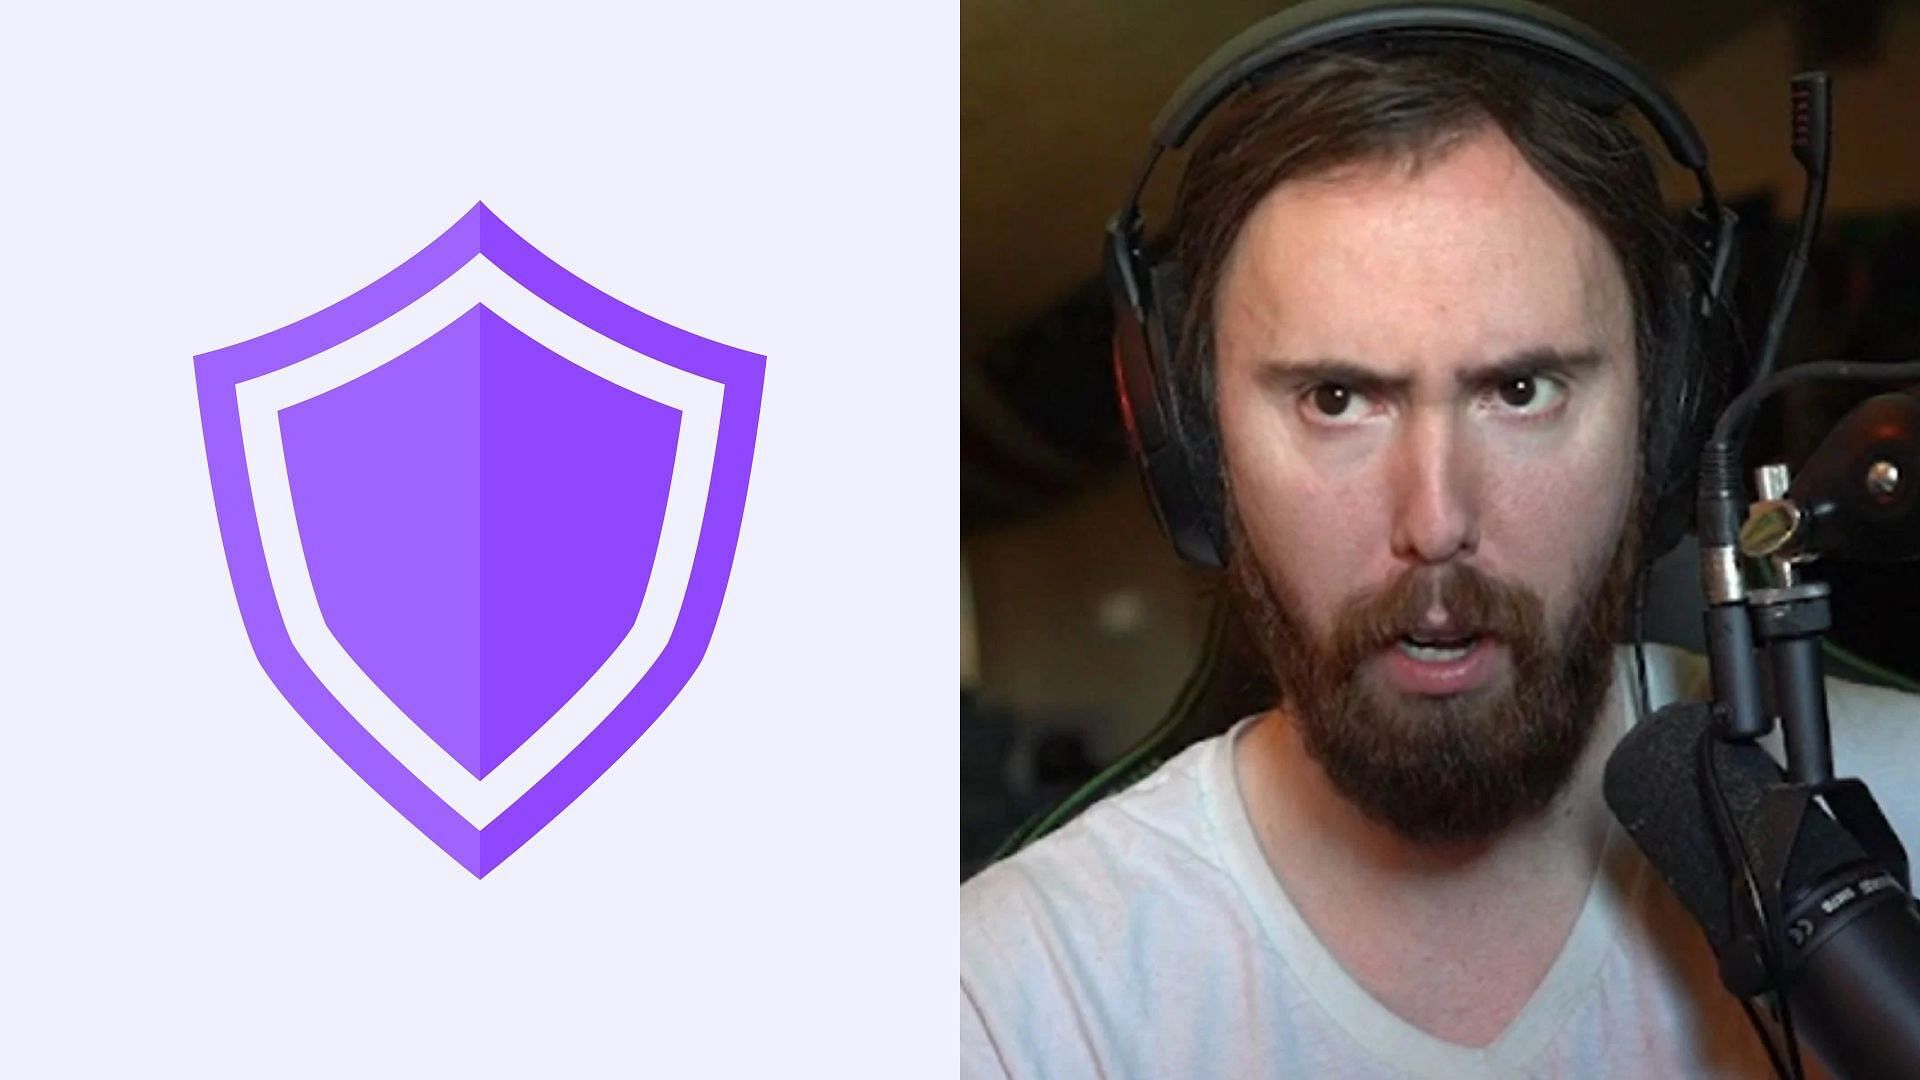 Asmongold goes off at Twitch for not banning s*xual content (Image via Twitch, zackrawrr/Twitch)